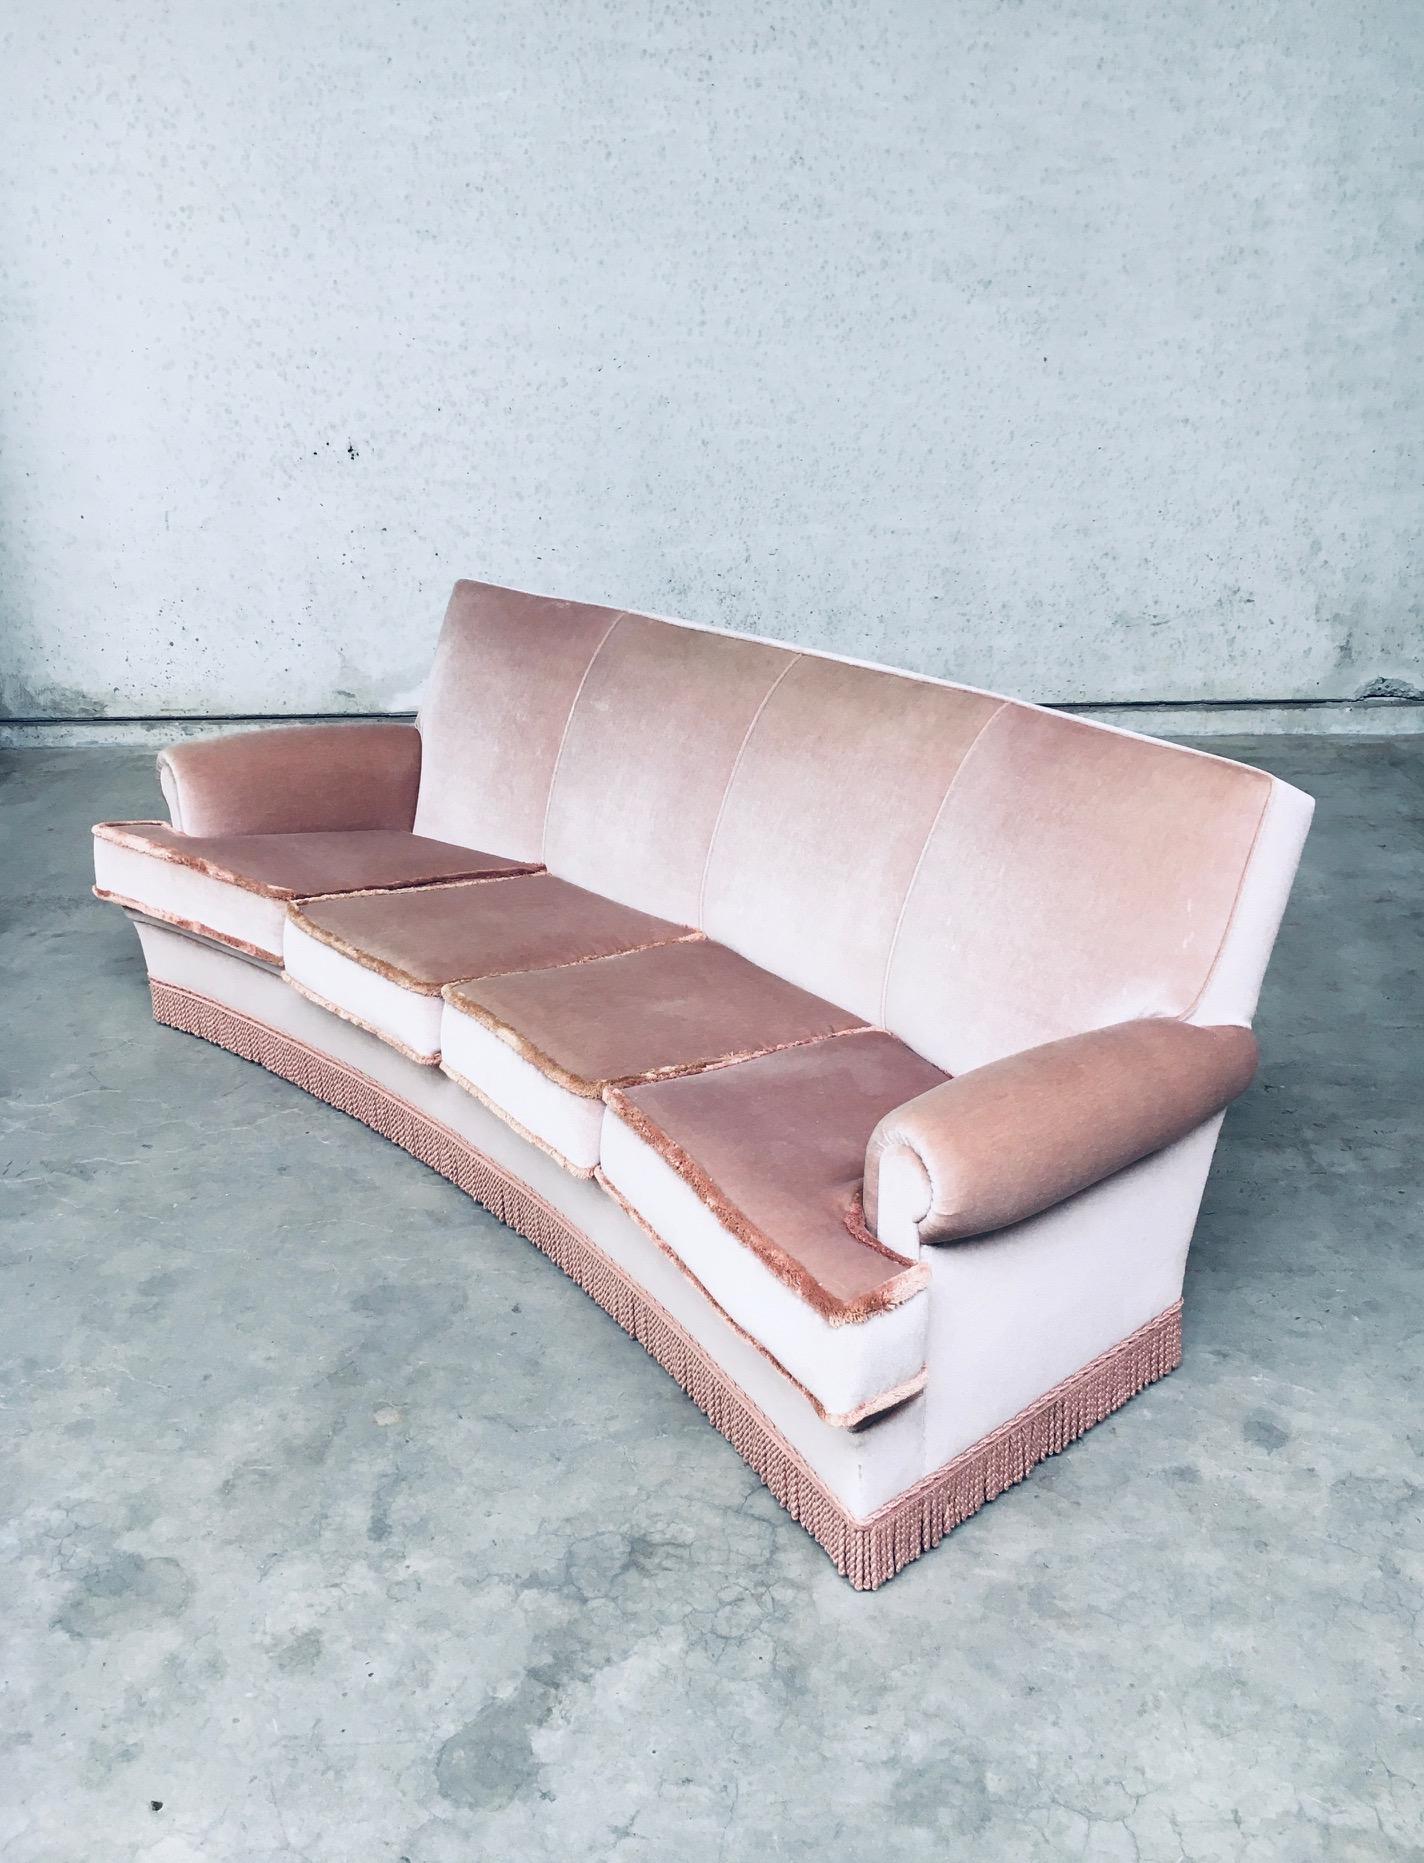 Vintage Midcentuy Design in the style of Art Deco Pink Velvet Curved 4 Seat Sofa with Fringe, made in Belgium 1950's. Large model sofa in soft pink color. In very good, hardly ever used condition. Measures 92cm x 240cm x 100cm.